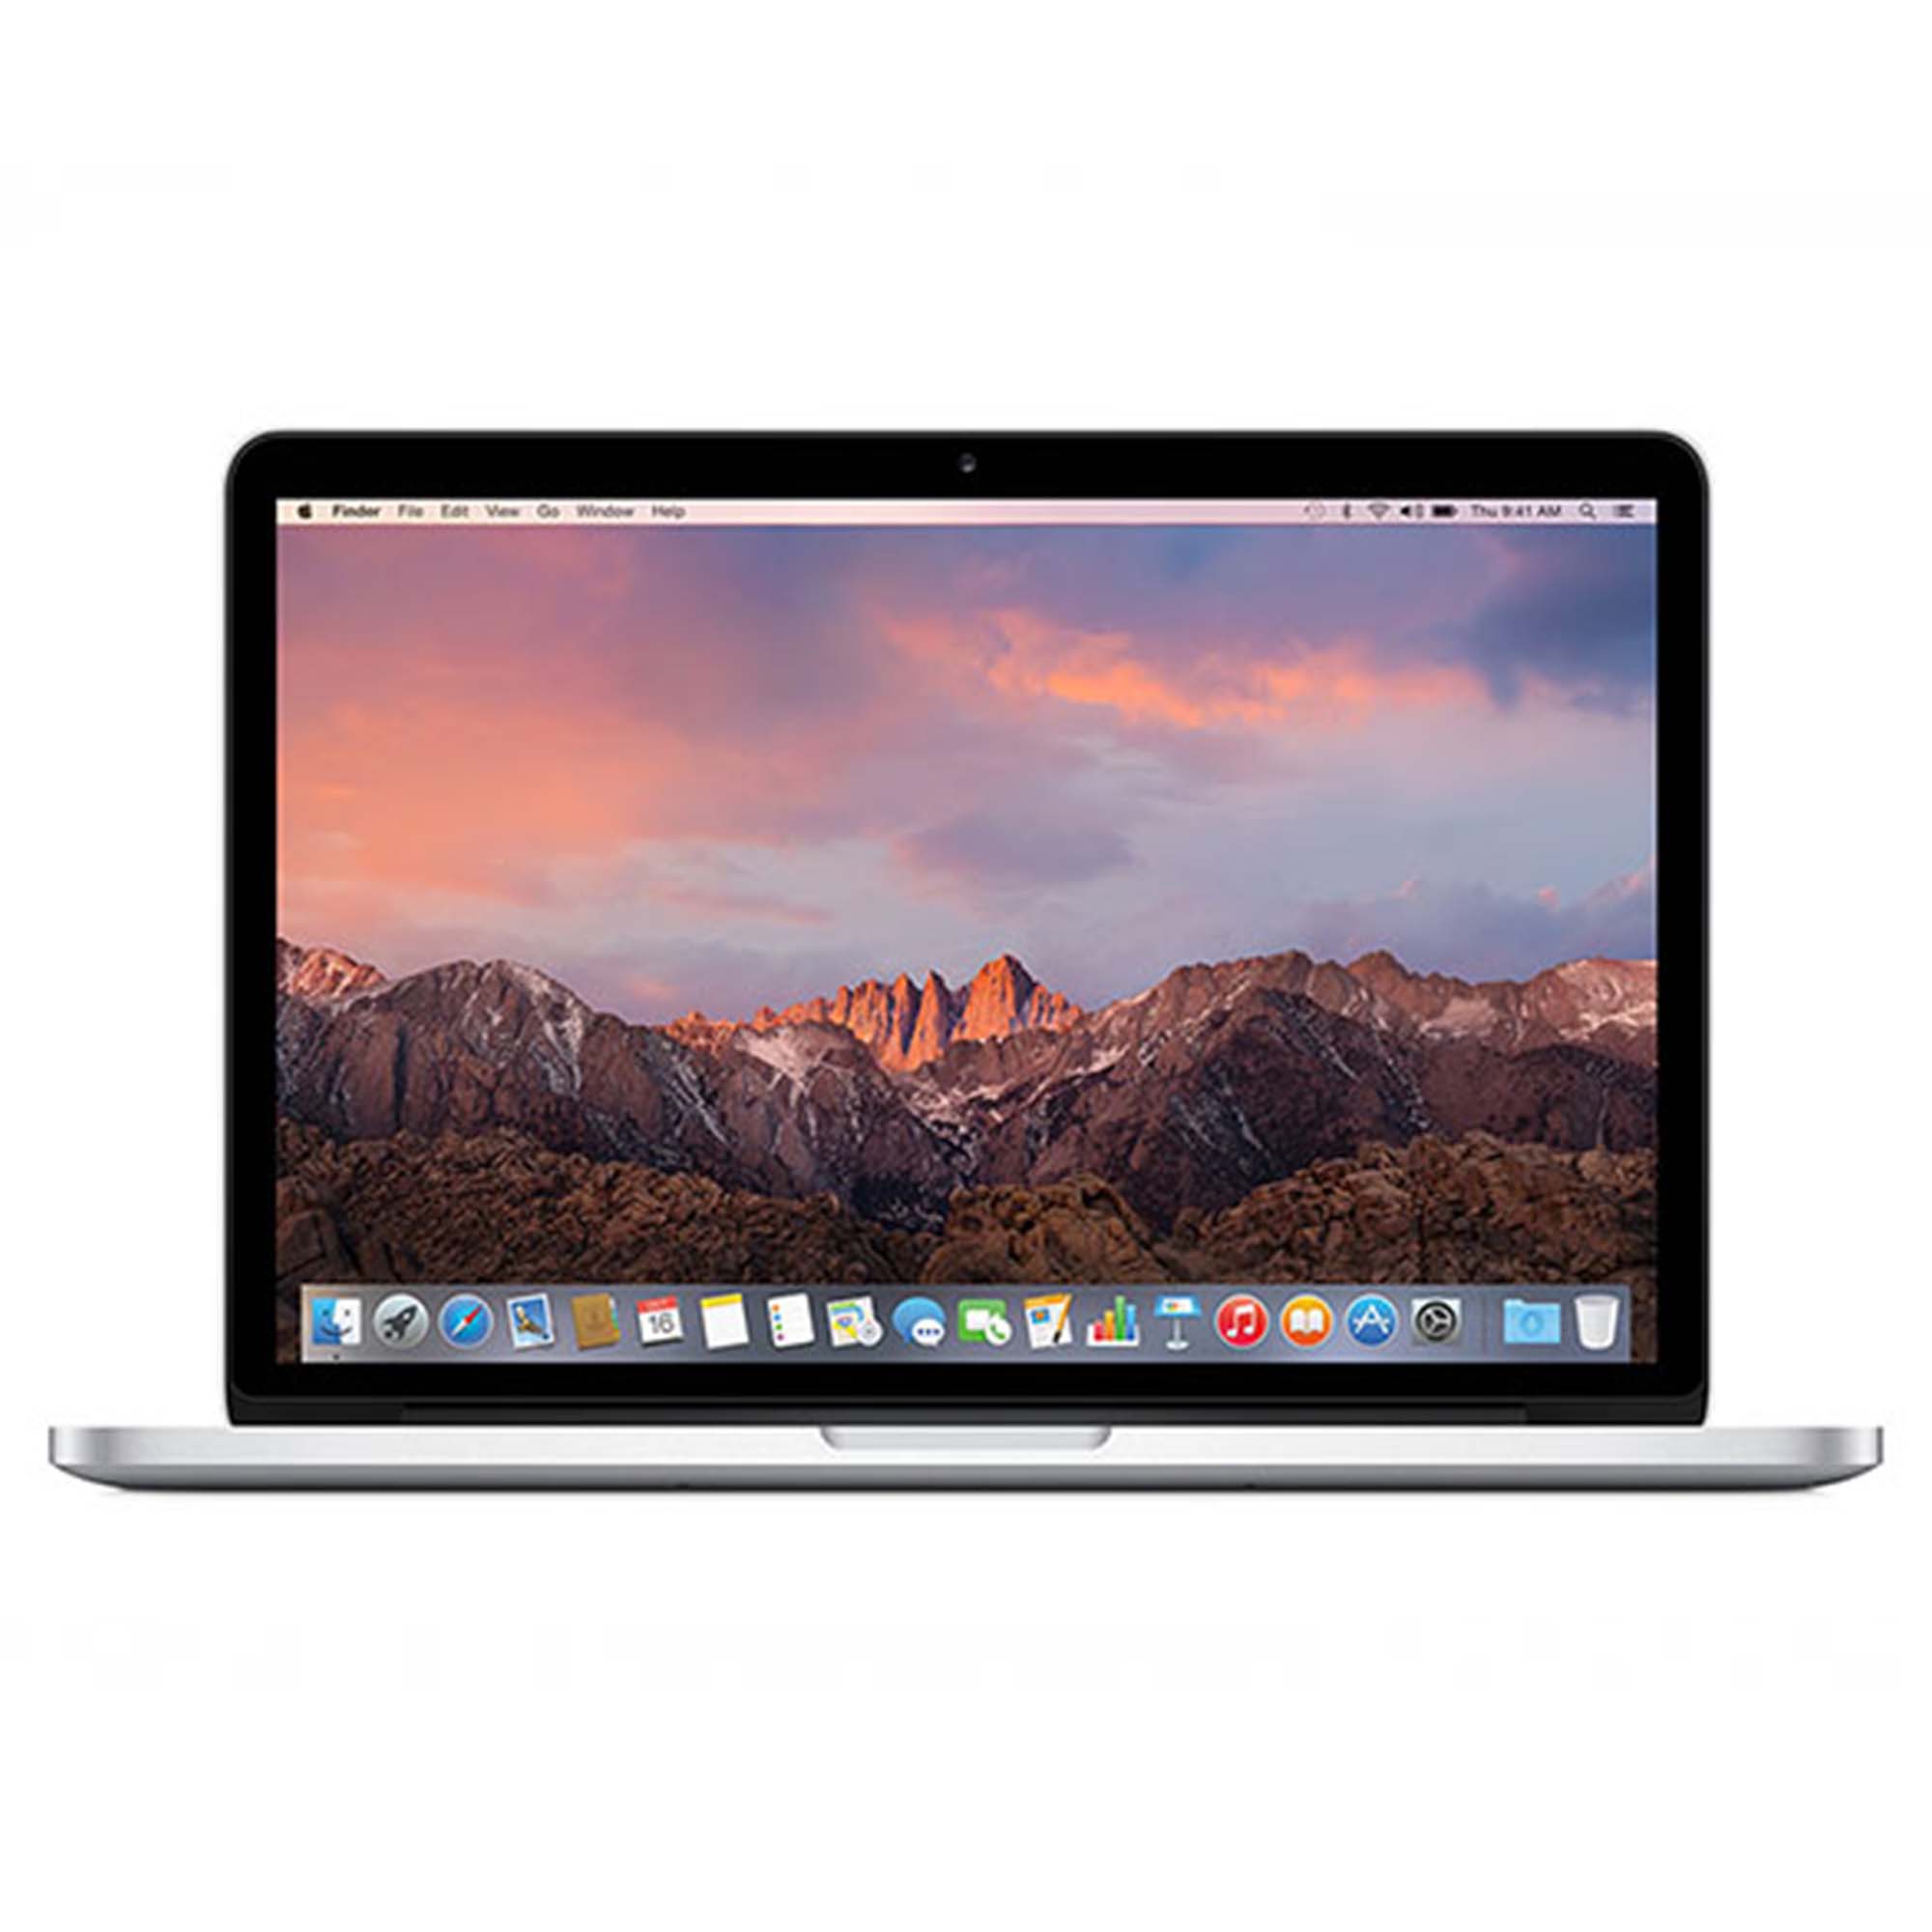 15" Apple MacBook Pro Retina 2.5GHz Quad Core i7 16GB Memory / 512GB SSD (Turbo Boost to 3.7GHz) (Grade A Used) - image 1 of 7